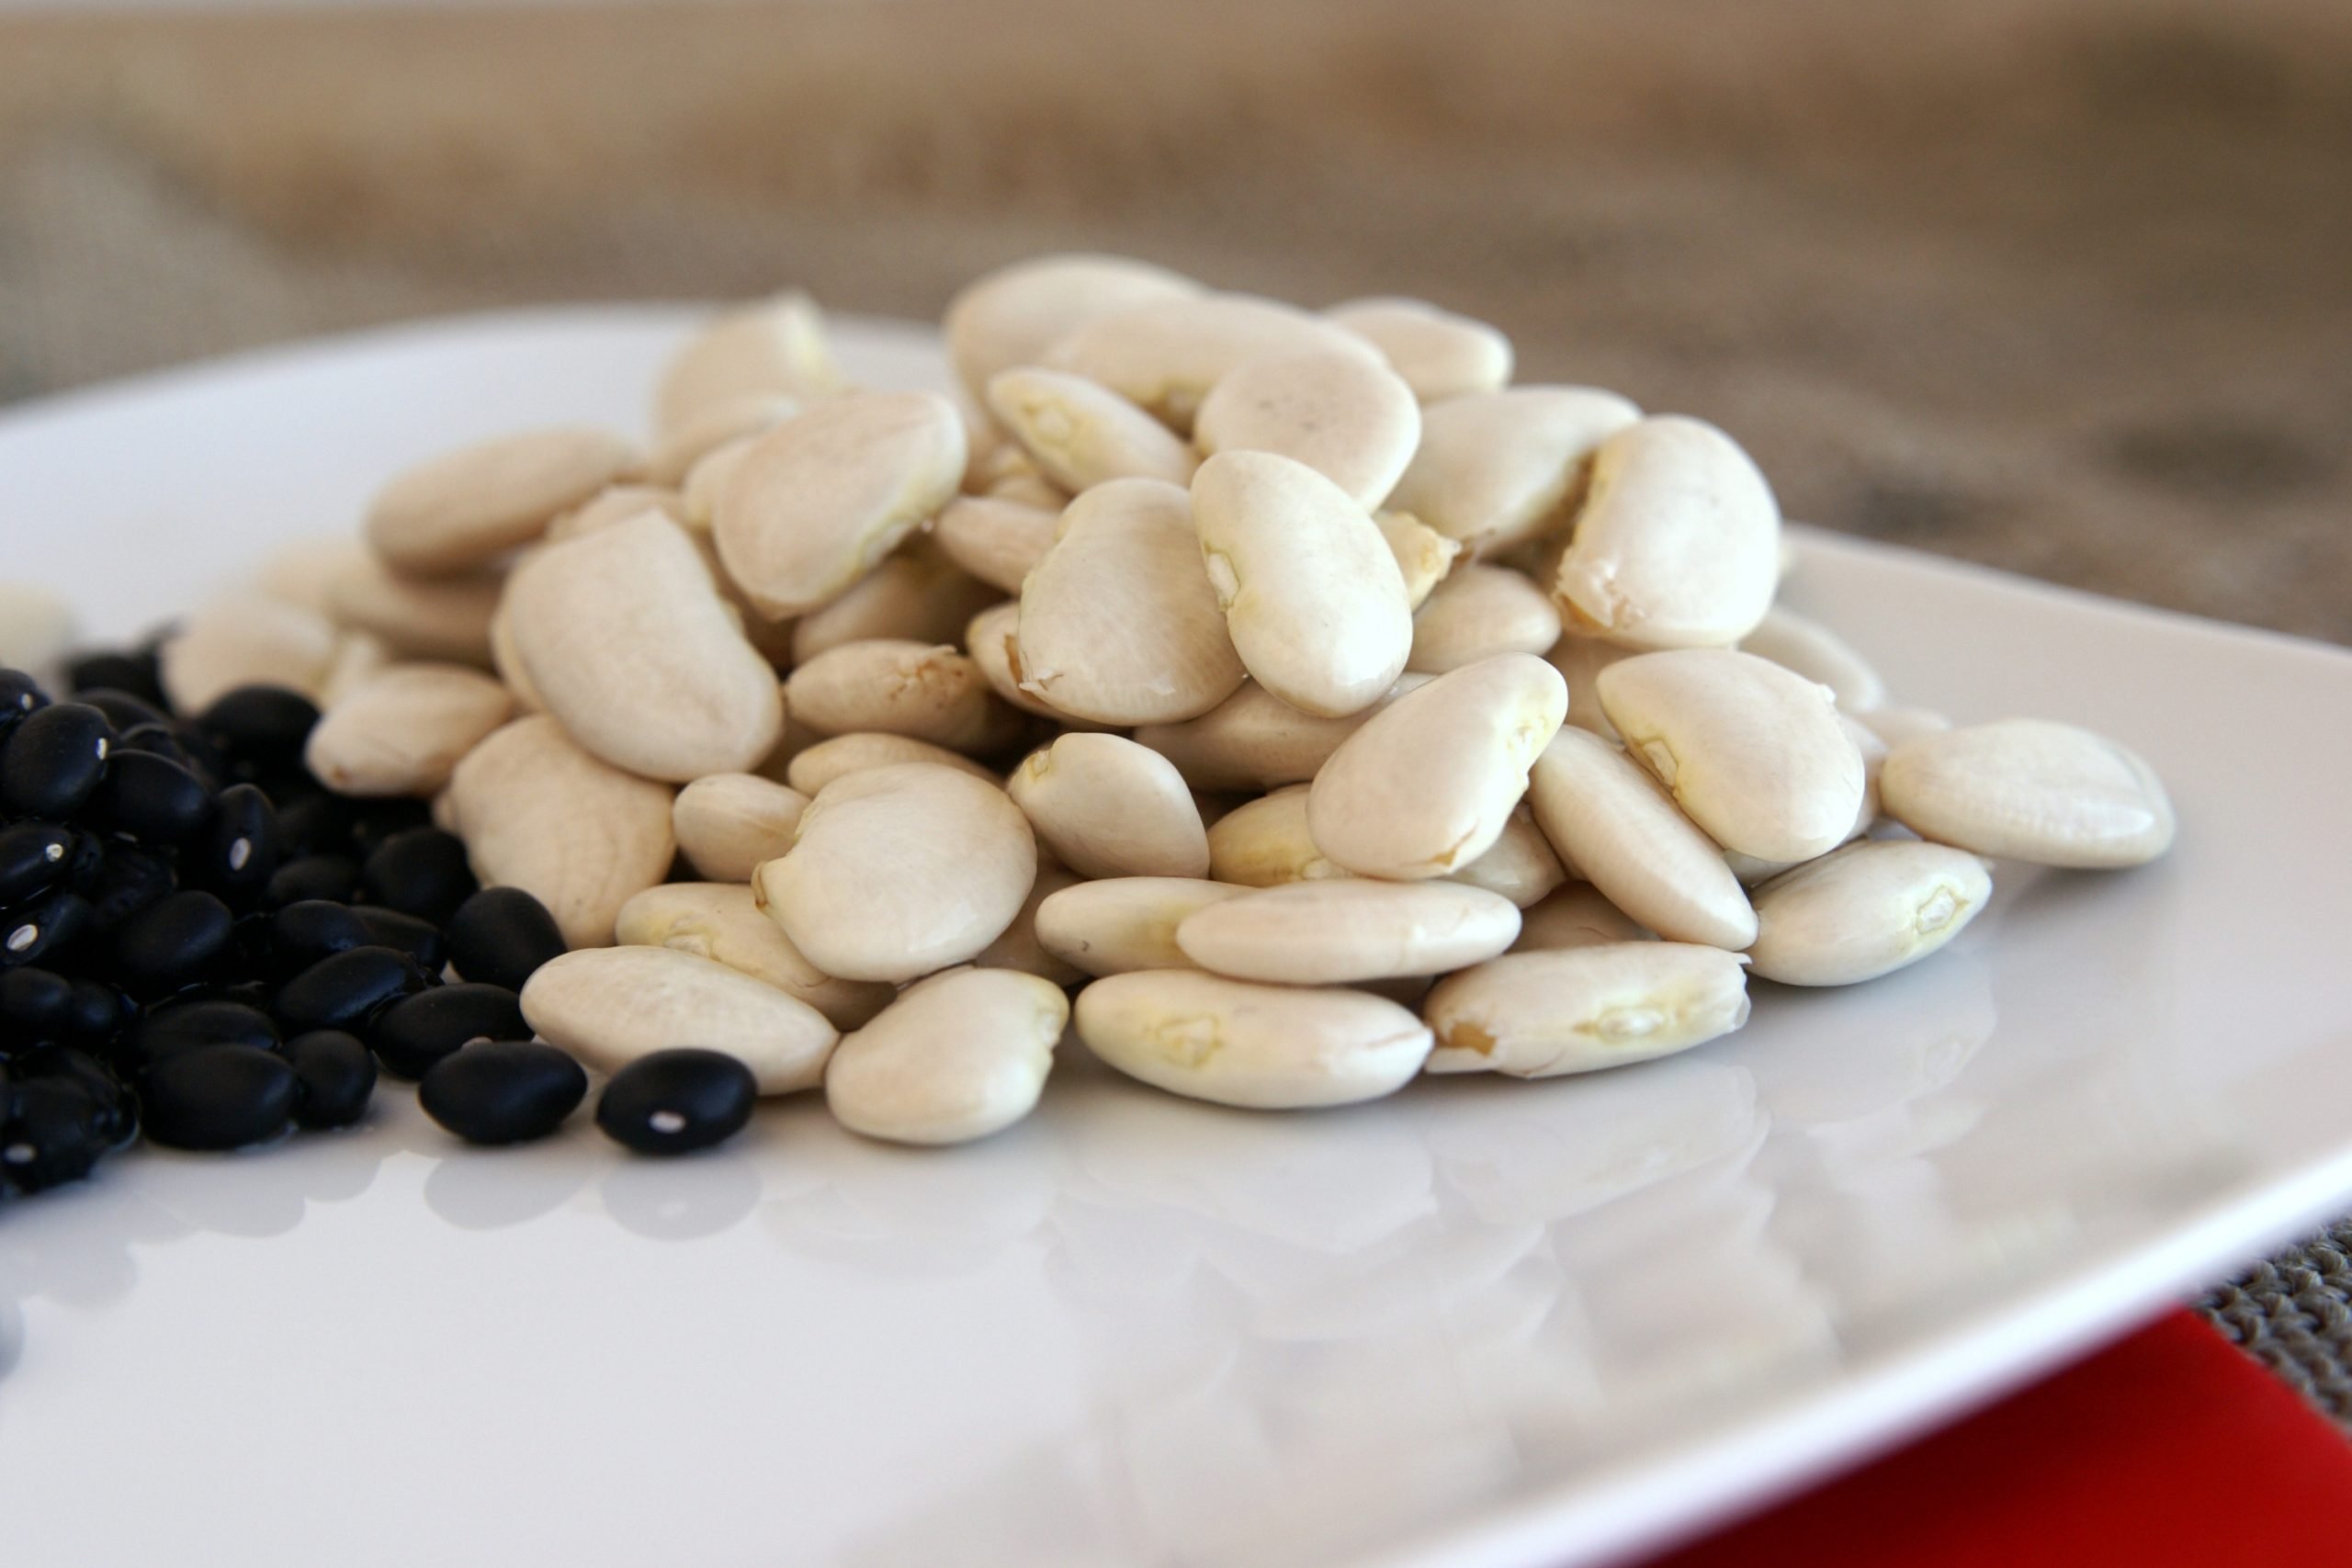 Which Beans Are Good for Diabetics?